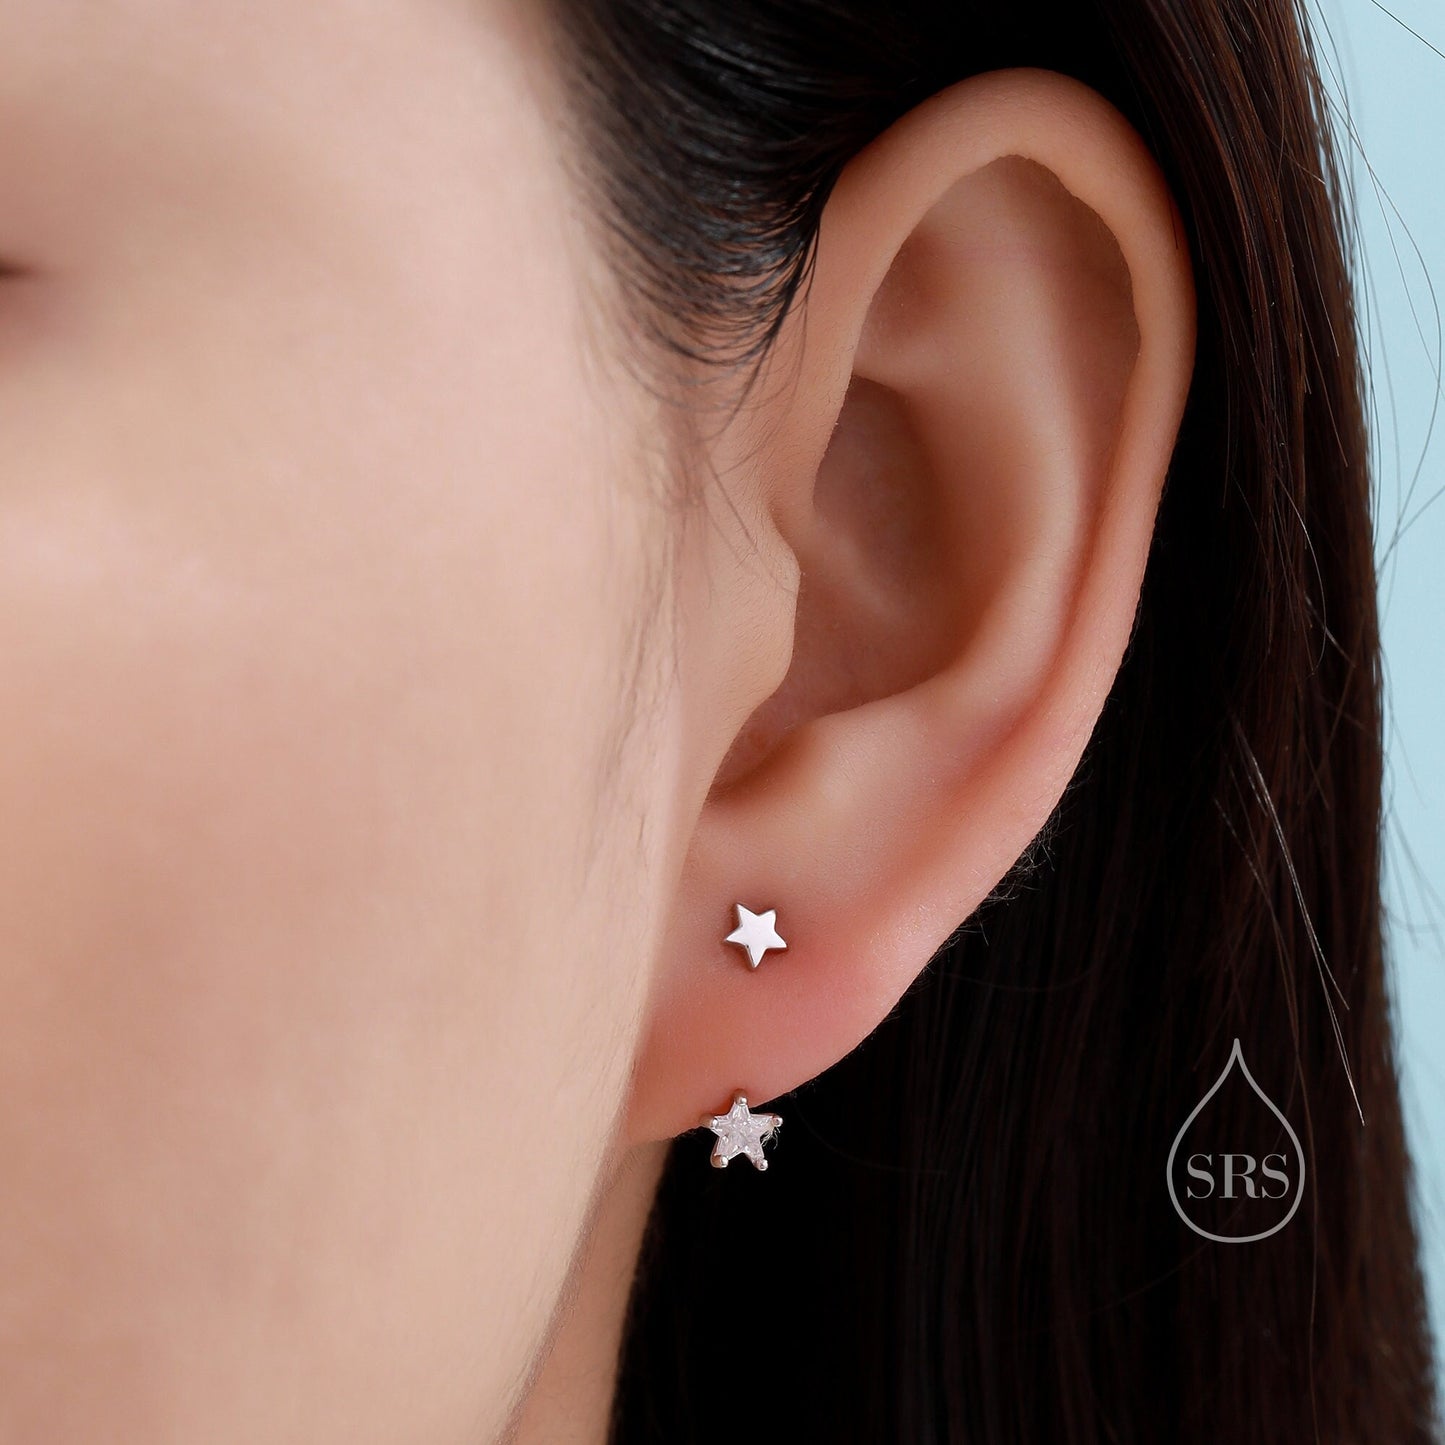 Double Star Ear Jacket in Sterling Silver, Two Star CZ Earrings in Sterling Silver, Silver, Gold or Rose Gold, Front and Back Earrings